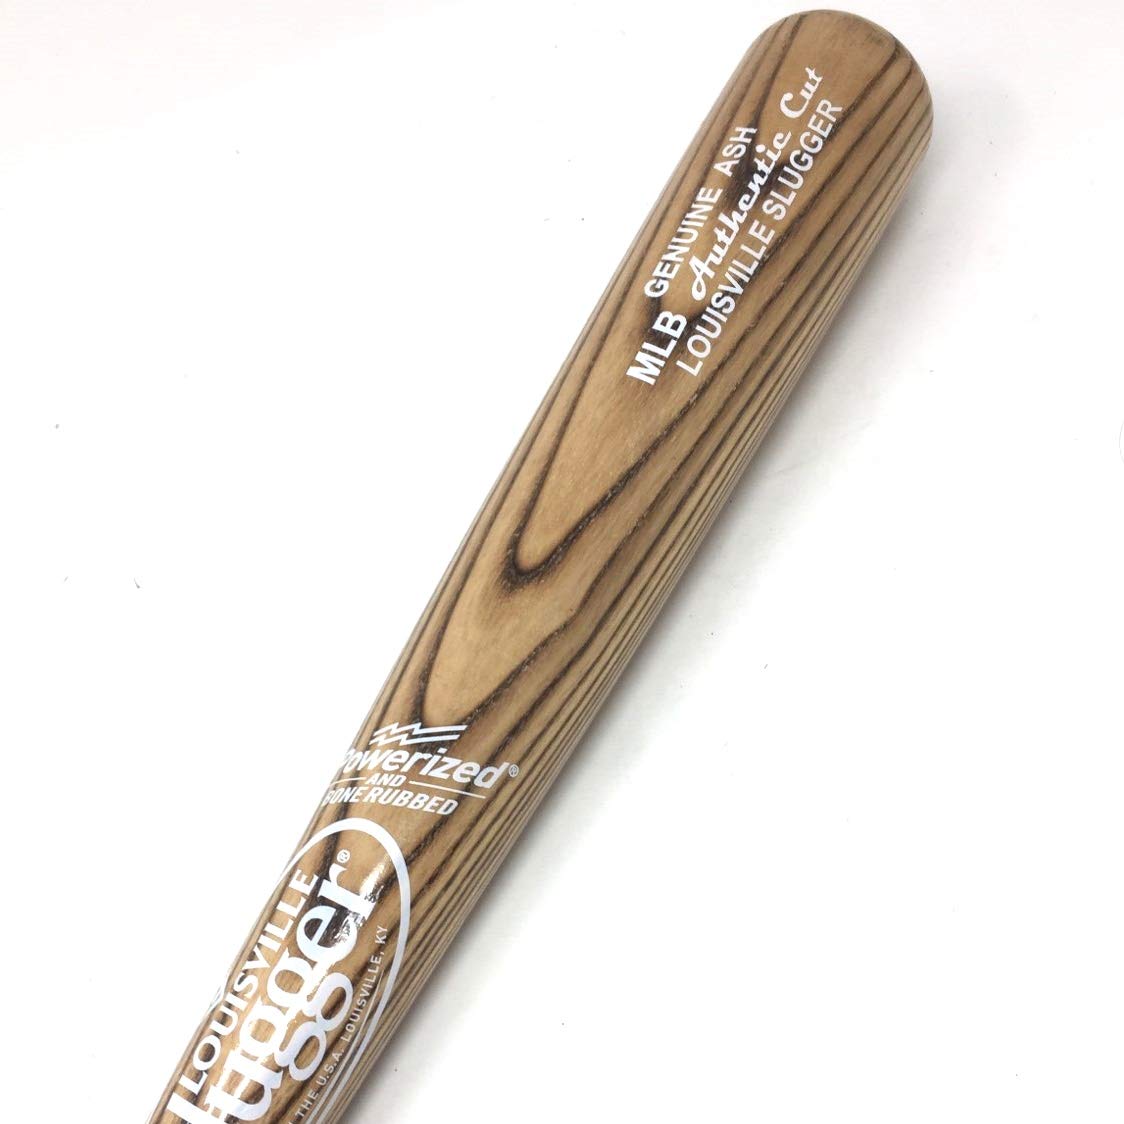 The Louisville Slugger Ash Wood Bat Series is made from flexible, dependable premium ash wood. Despite a lightweight feel, the bat maintains all the durability with the flexibility you expect from an ash bat.